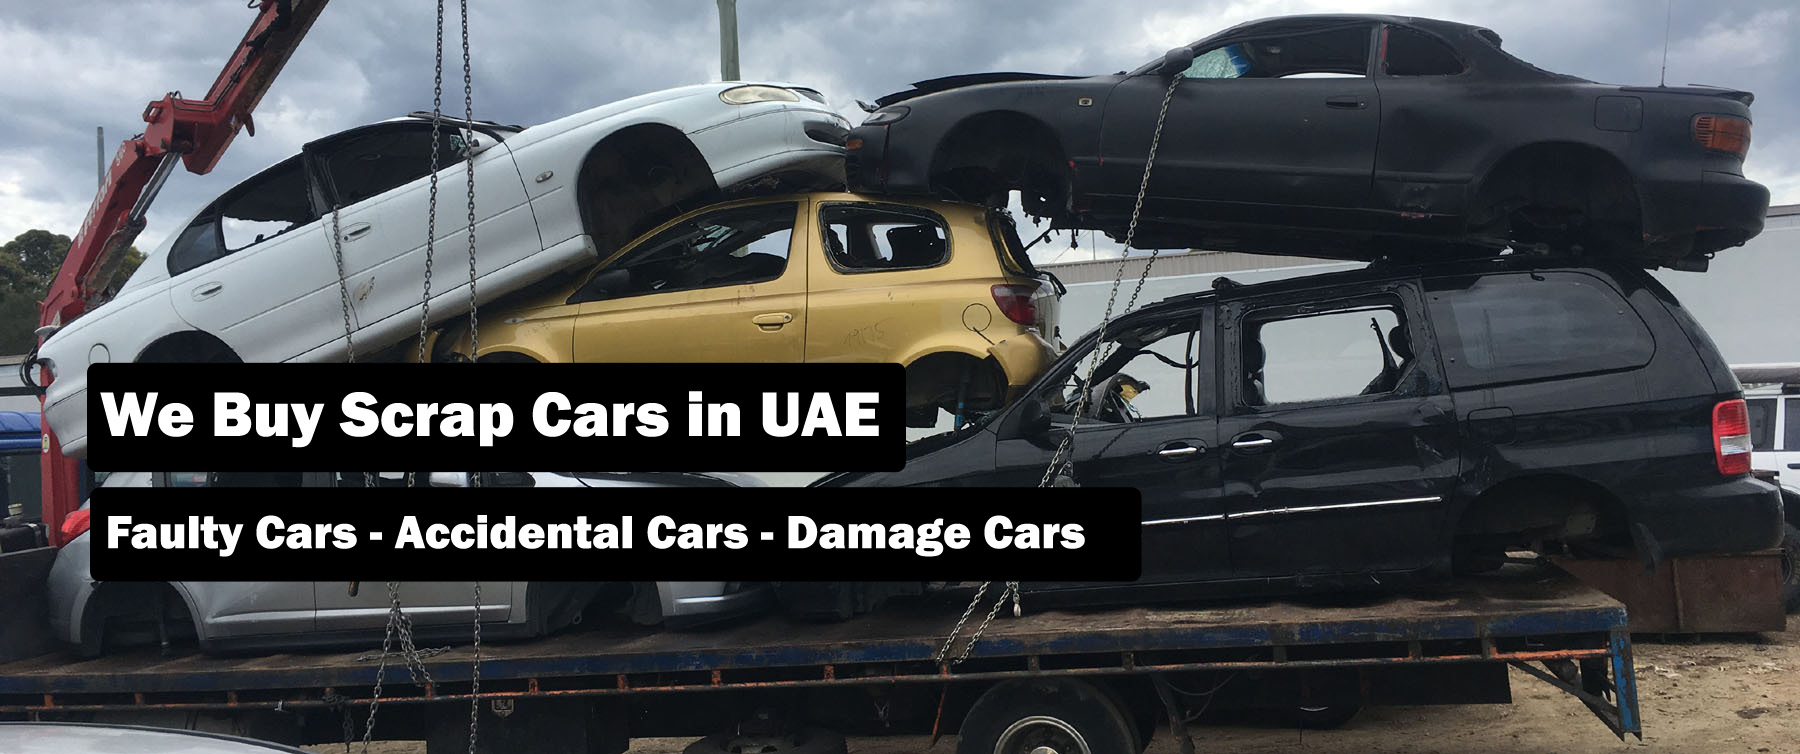 WE BUY USED JUNK SCRAP ACCIDENT DAMAGE CARS